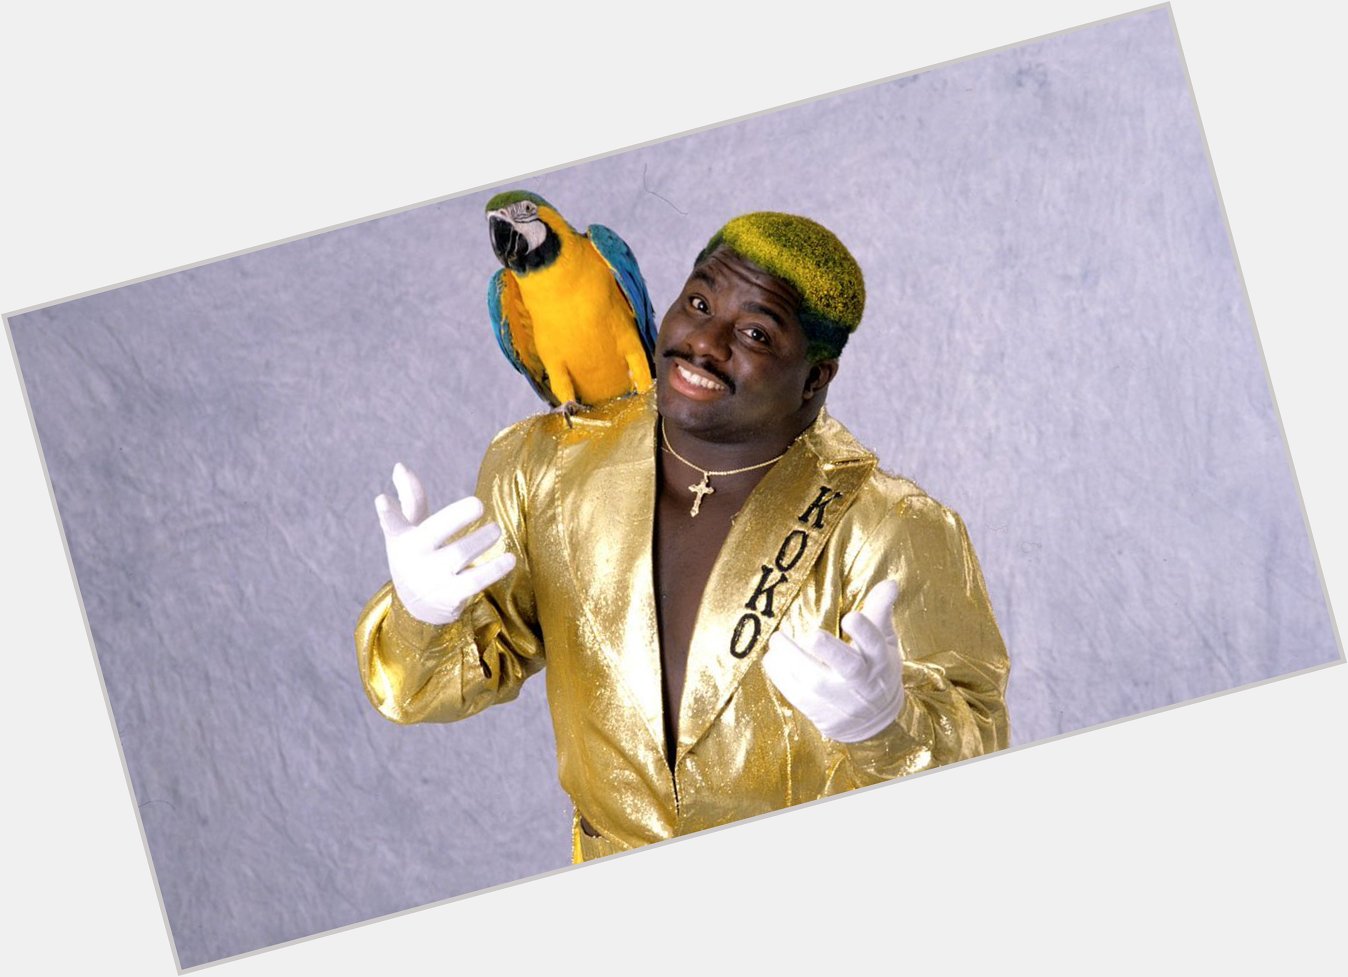 The AMP Crew would like to wish a Happy 61st Birthday to former Superstar Koko B. Ware! 